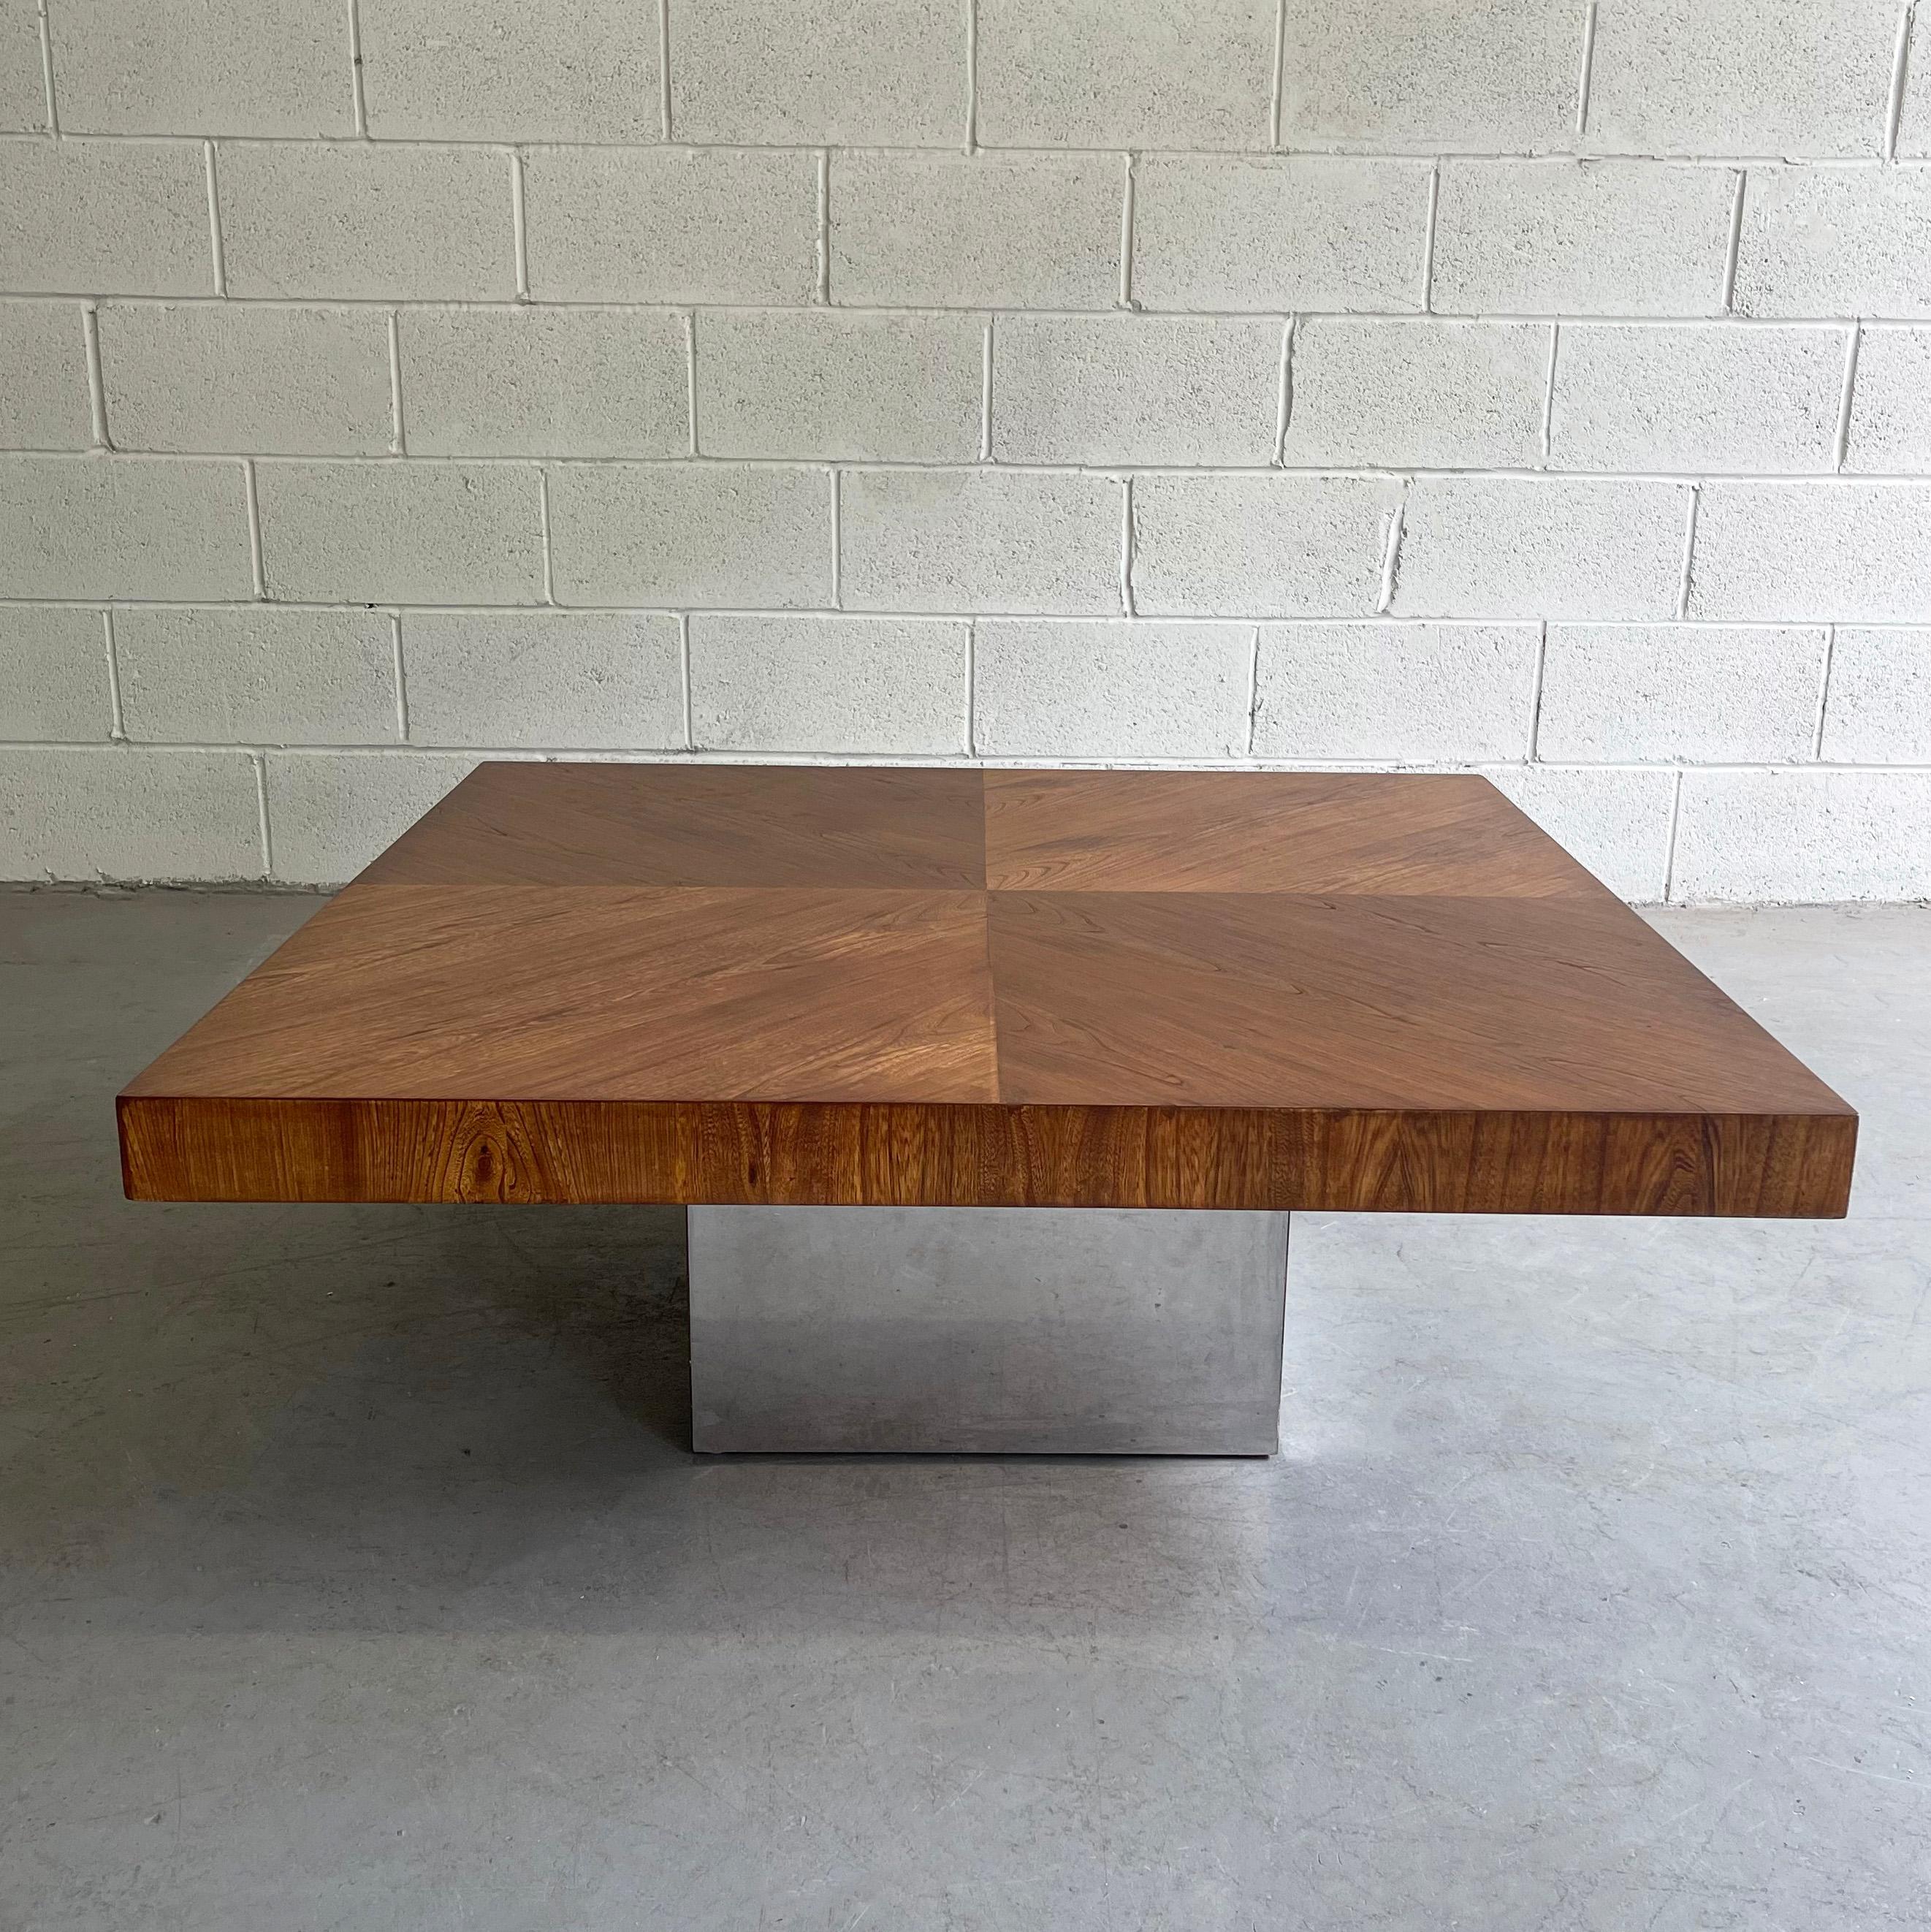 Mid-Century Modern, square coffee table by Milo Baughman for Thayer Coggin featues a contrasting grain, walnut top with chrome cube base.